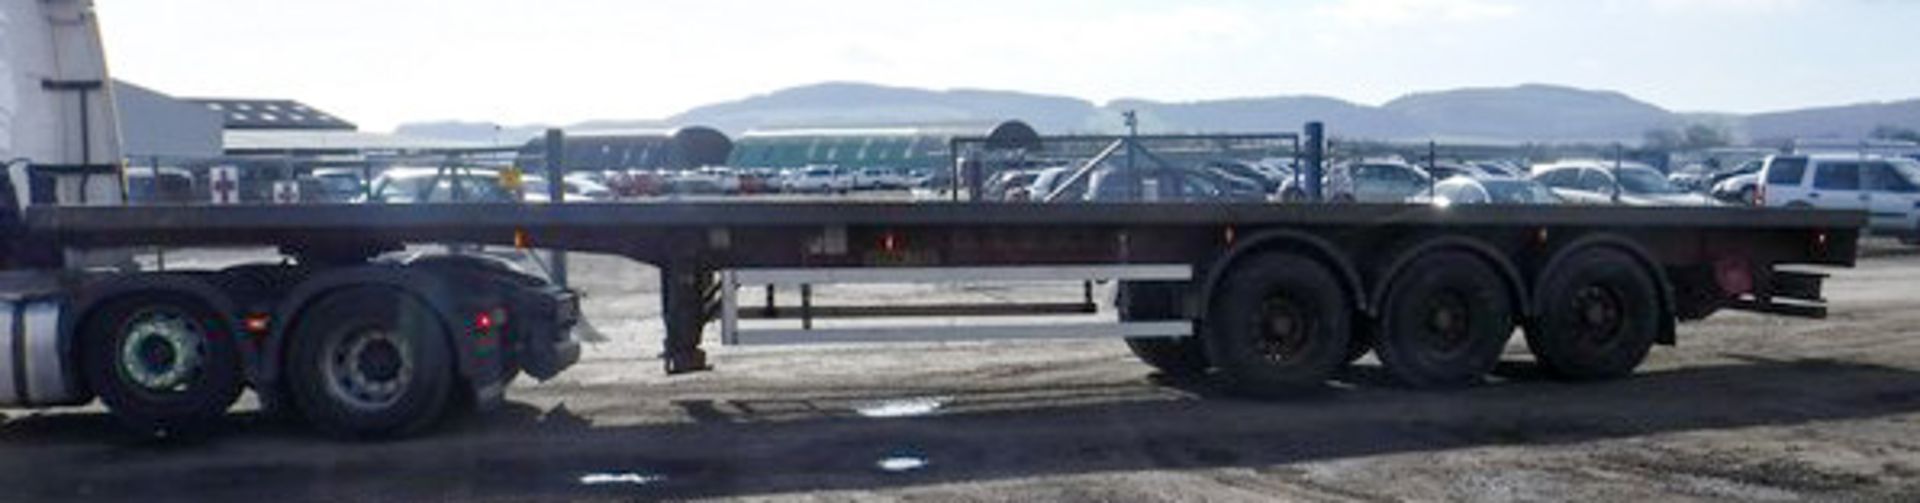 2004 MONTRACON FLATBED, REG C160047, ID 22187, 3 AXLES, MOT UNTIL NOVEMBER 2018 NO DOC IN OFFICE - Image 2 of 9